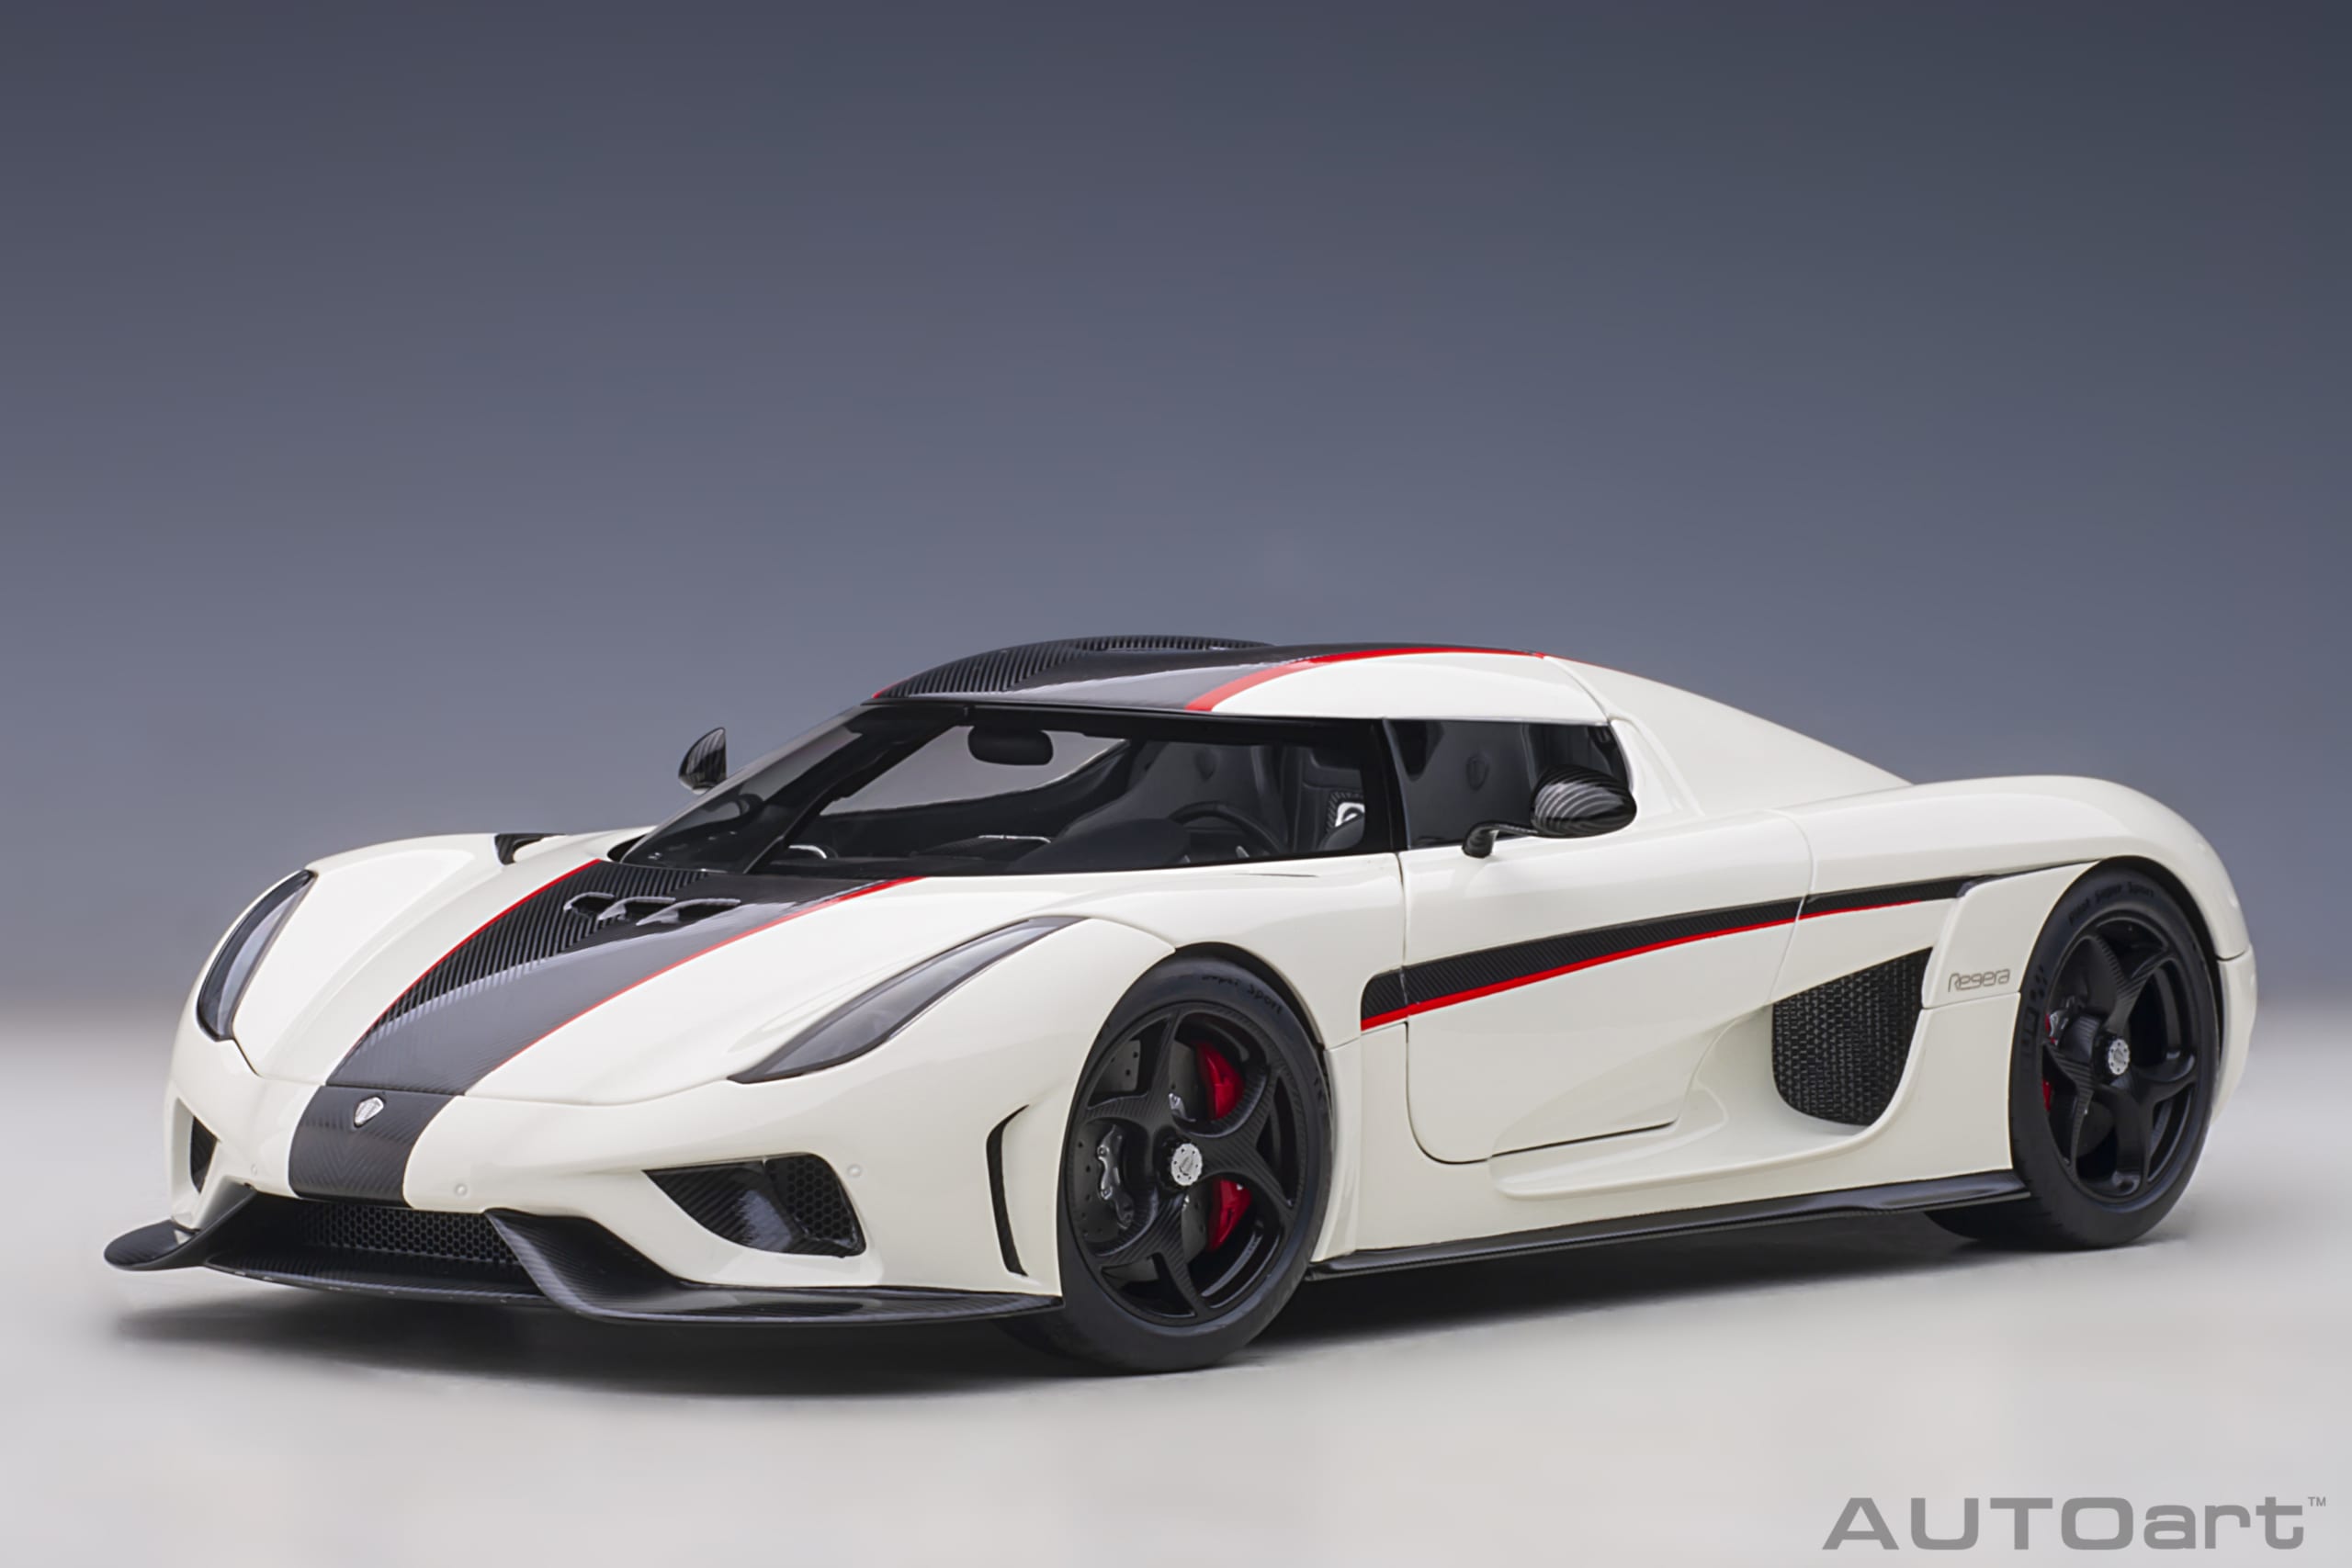 midt i intetsteds Vellykket Medicin AUTOart 1/18 Koenigsegg Regera (Arctic White/Carbon with Red accents) -  AXELLWORKS HOBBYTOWN